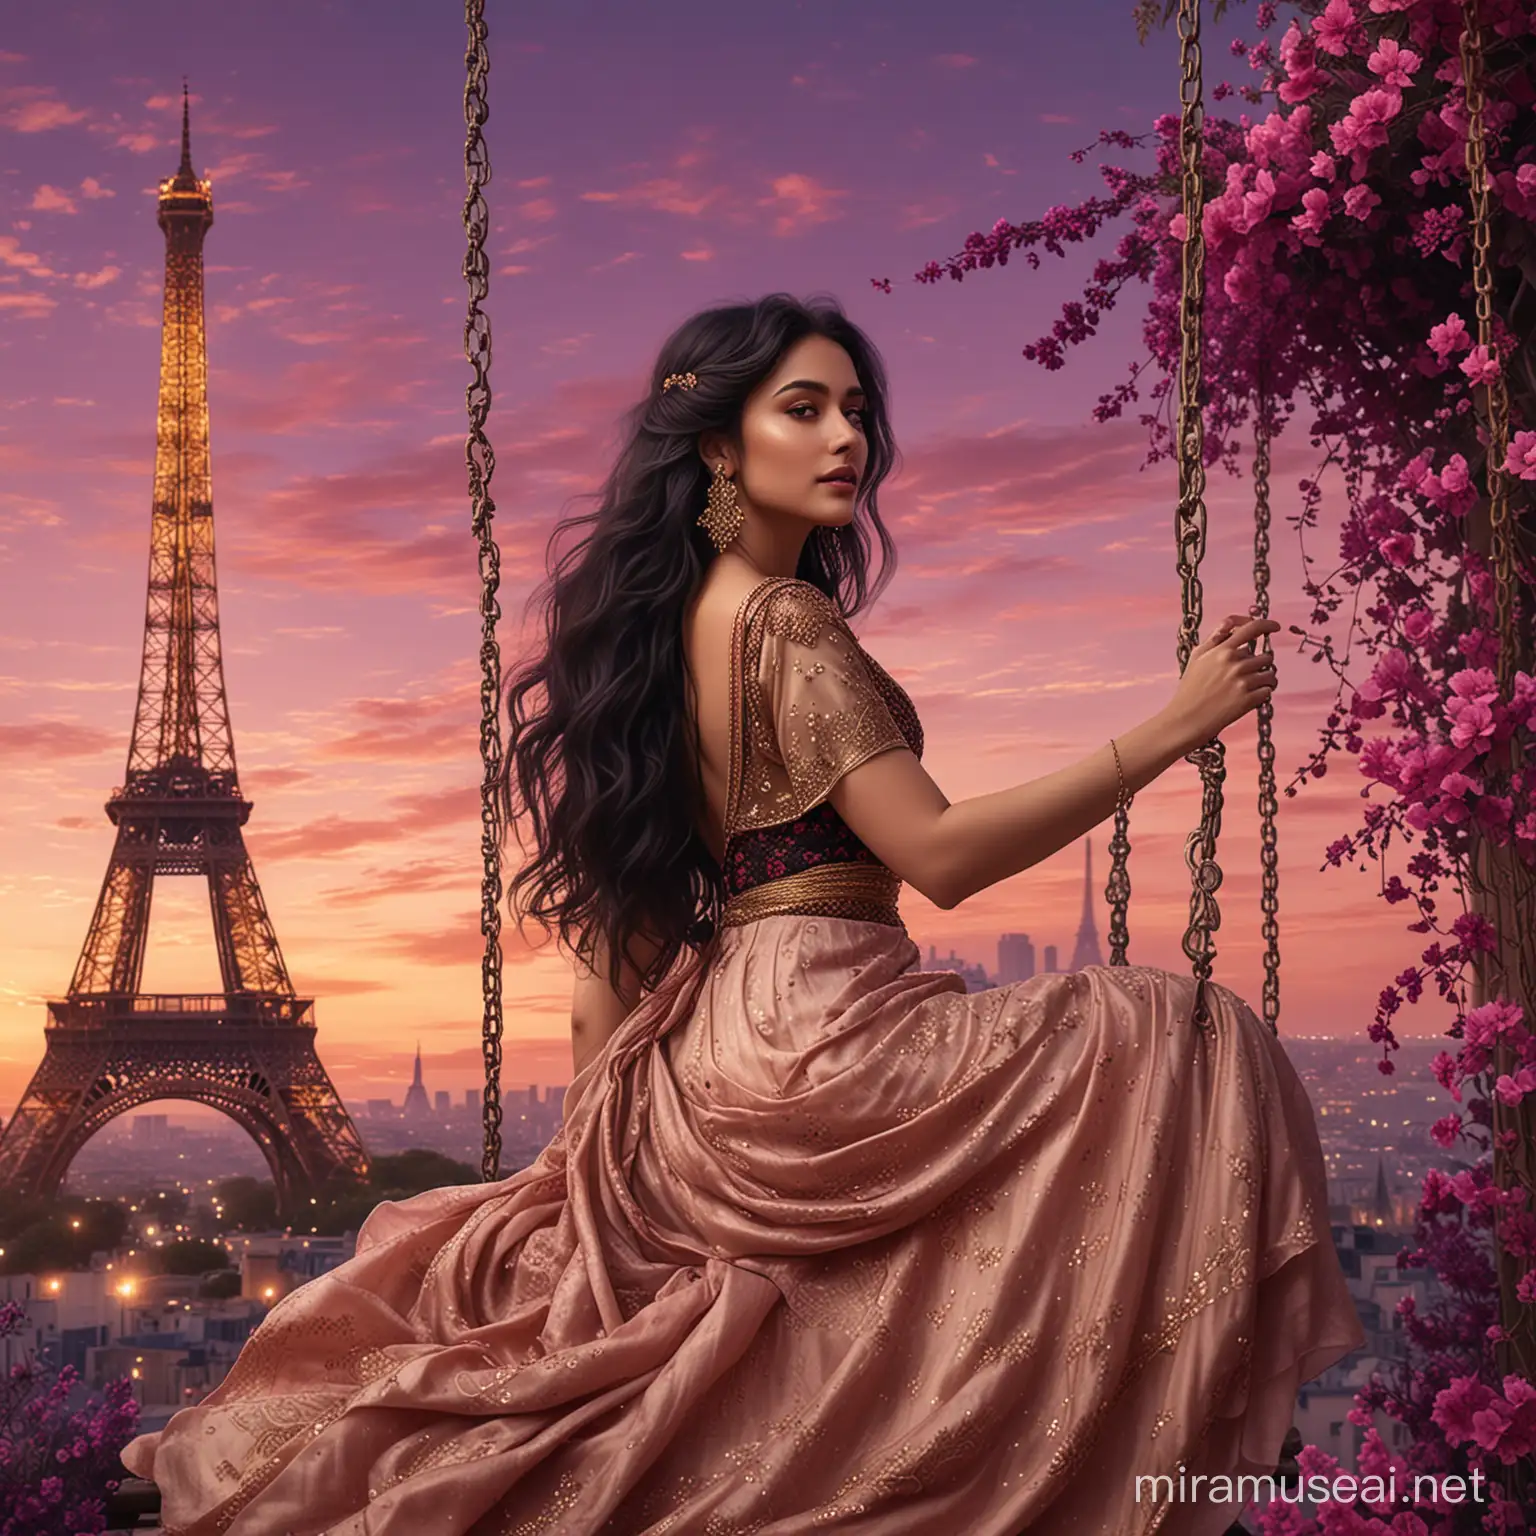 A beautiful woman, from profile, with highly detailed dress, sitting on a swing in a dark pink sky, surrounded by dark purple flowers. Long black wavy hair, long elegant beige and dark red dress, sari tissu. Background golden vapor. Background golden tower effel. 8k, fantasy, illustration, digital art, illustration art, fantasy art, fantasy style